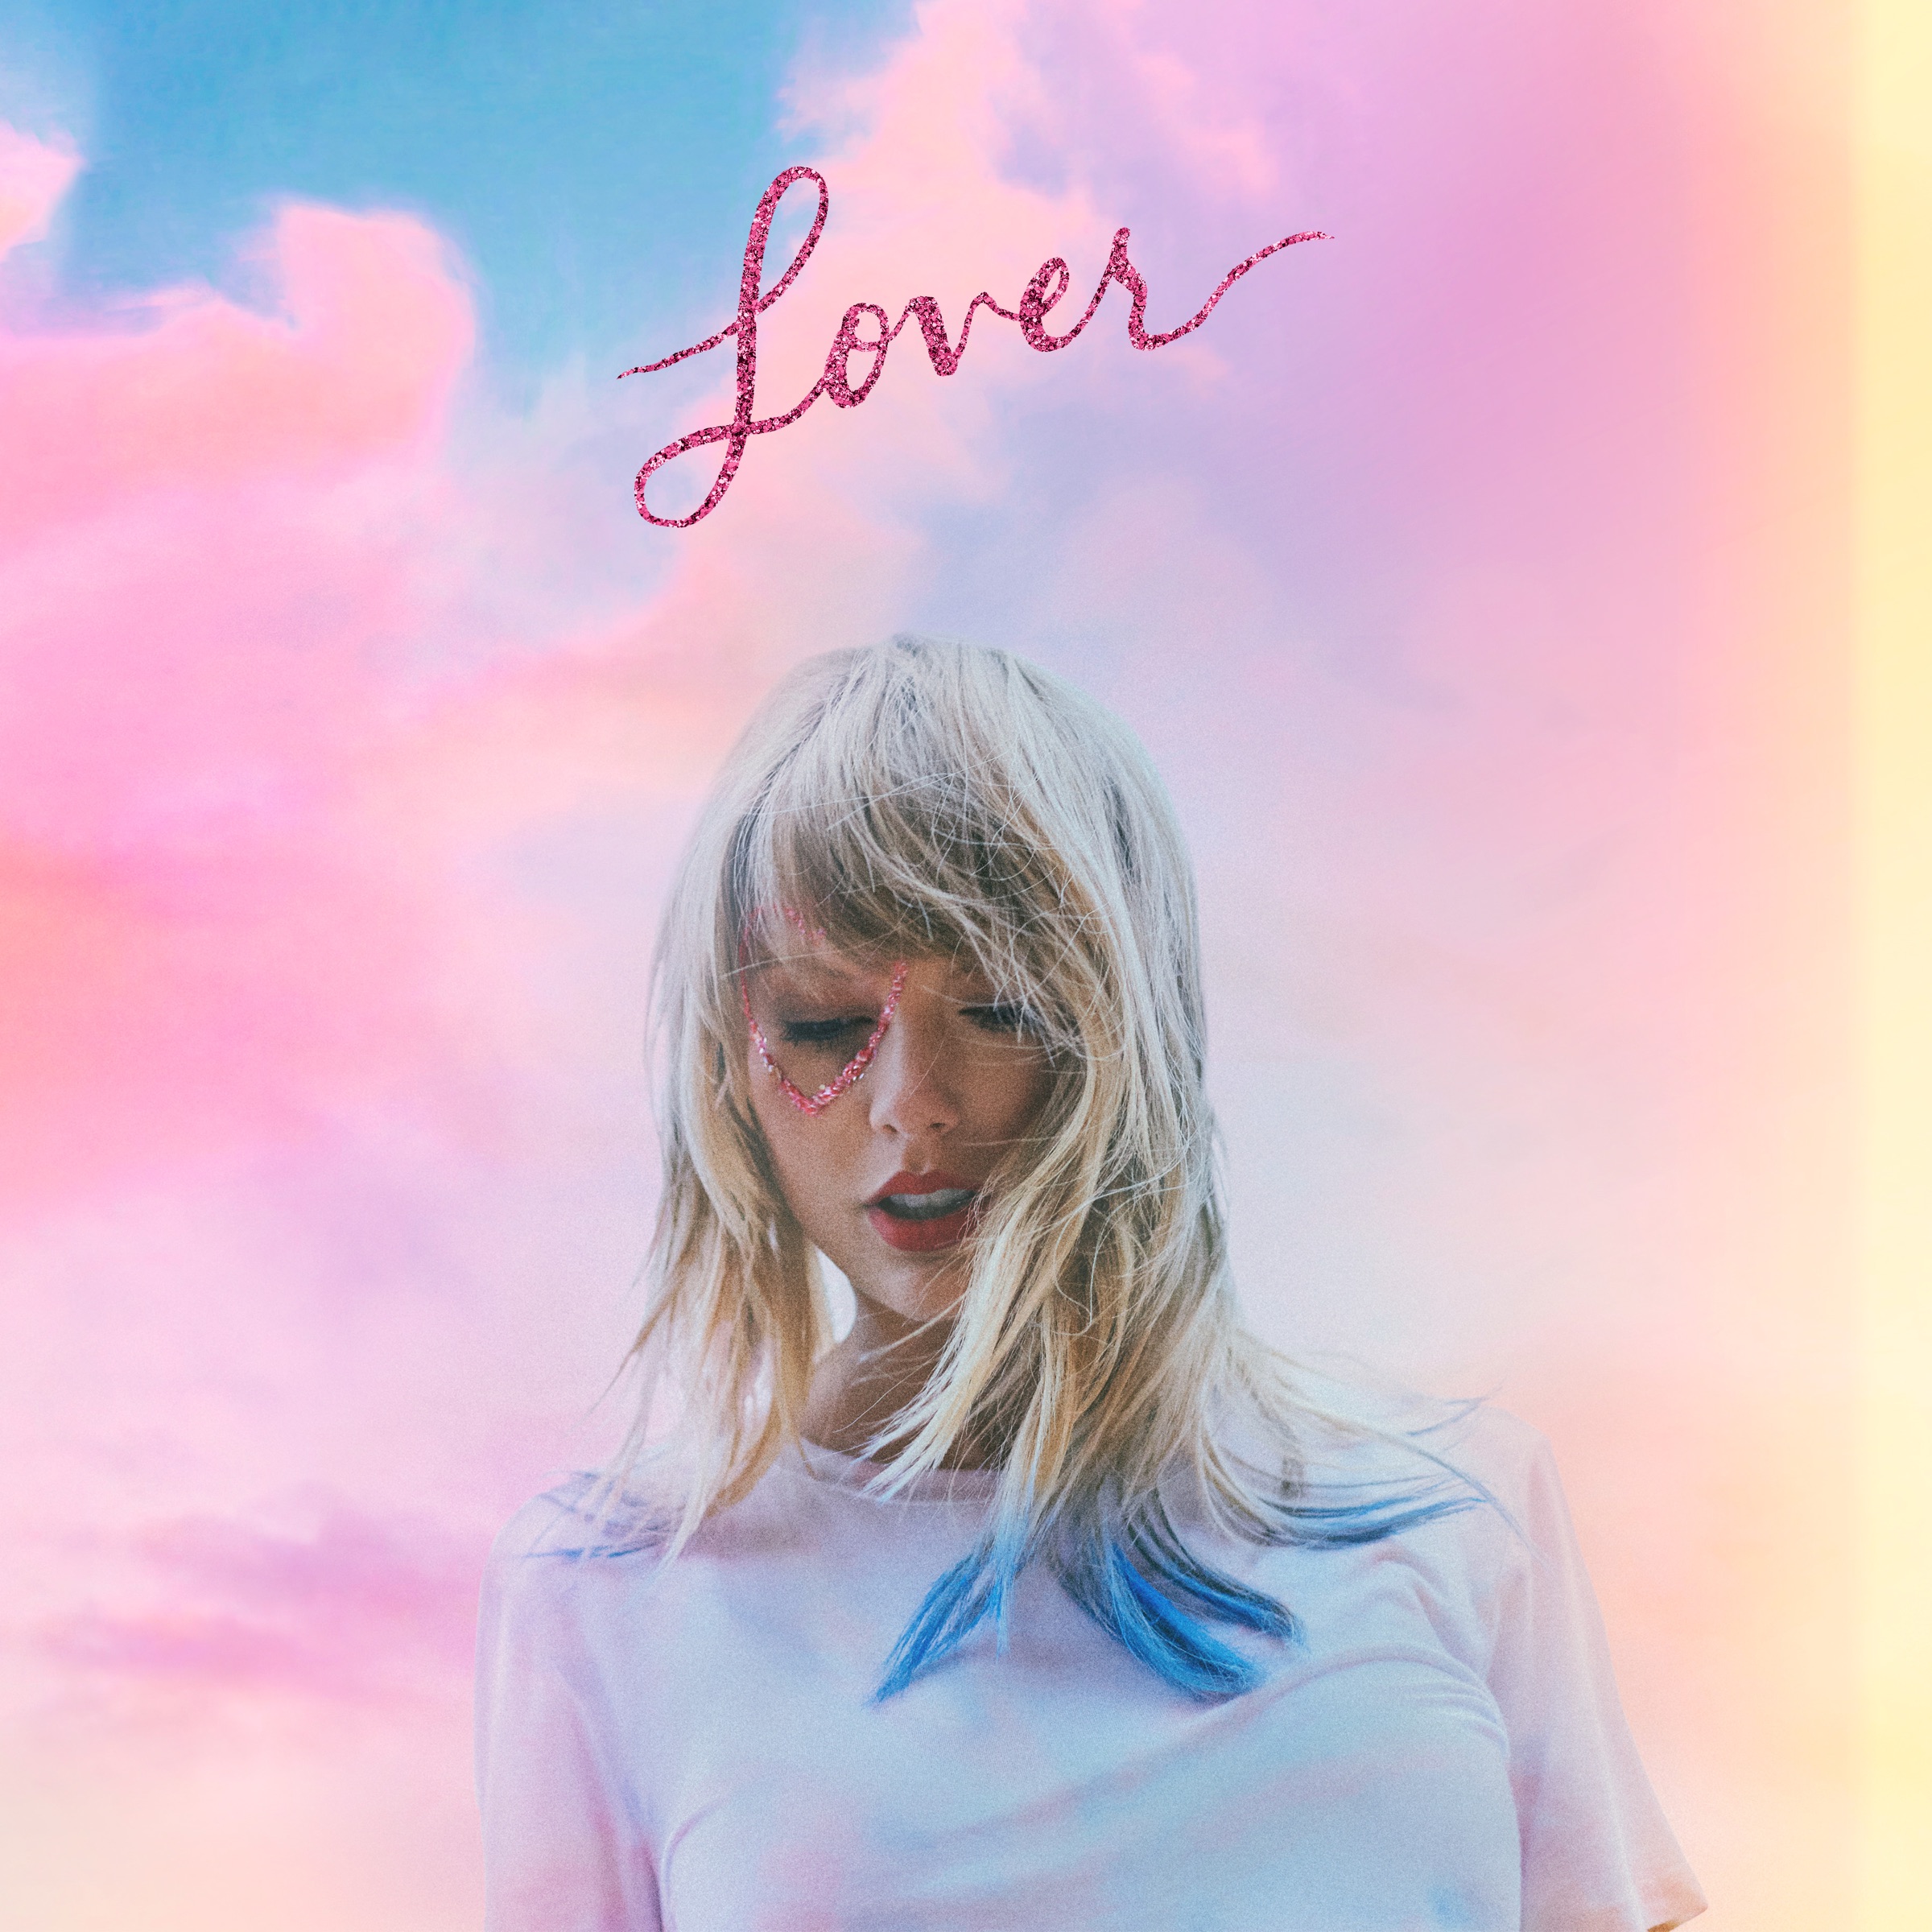 Album Art for "Lover" by Taylor Swift